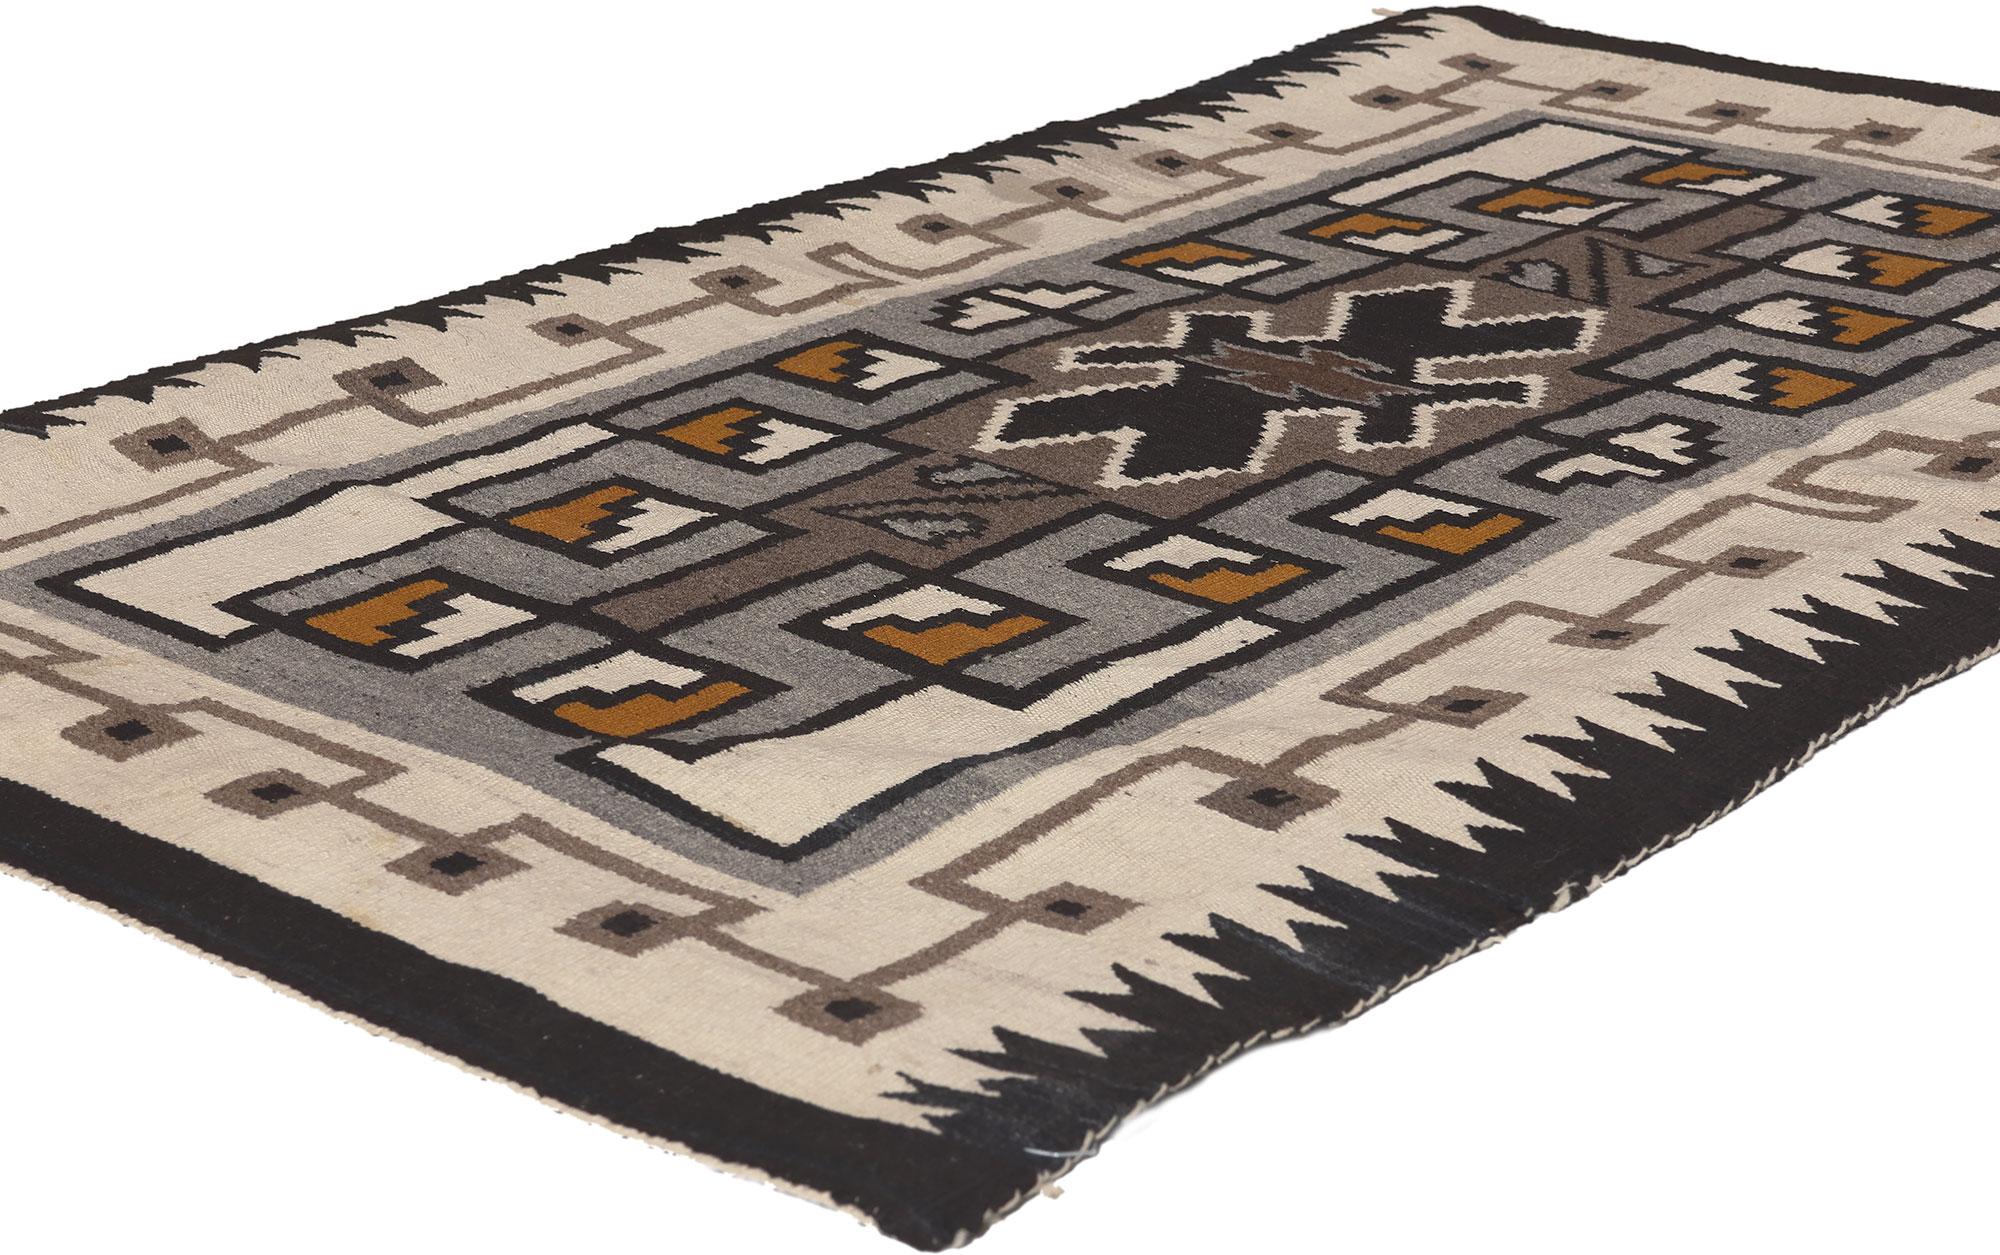 78637 Vintage Two Grey Hills Navajo Rug, 02'11 x 05'00.
Organic Modern meets subtle Southwest style in this handwoven Two Grey Hills rug. The eye-catching Navajo design and neutral earthy colorway woven into this piece work together to evoke a